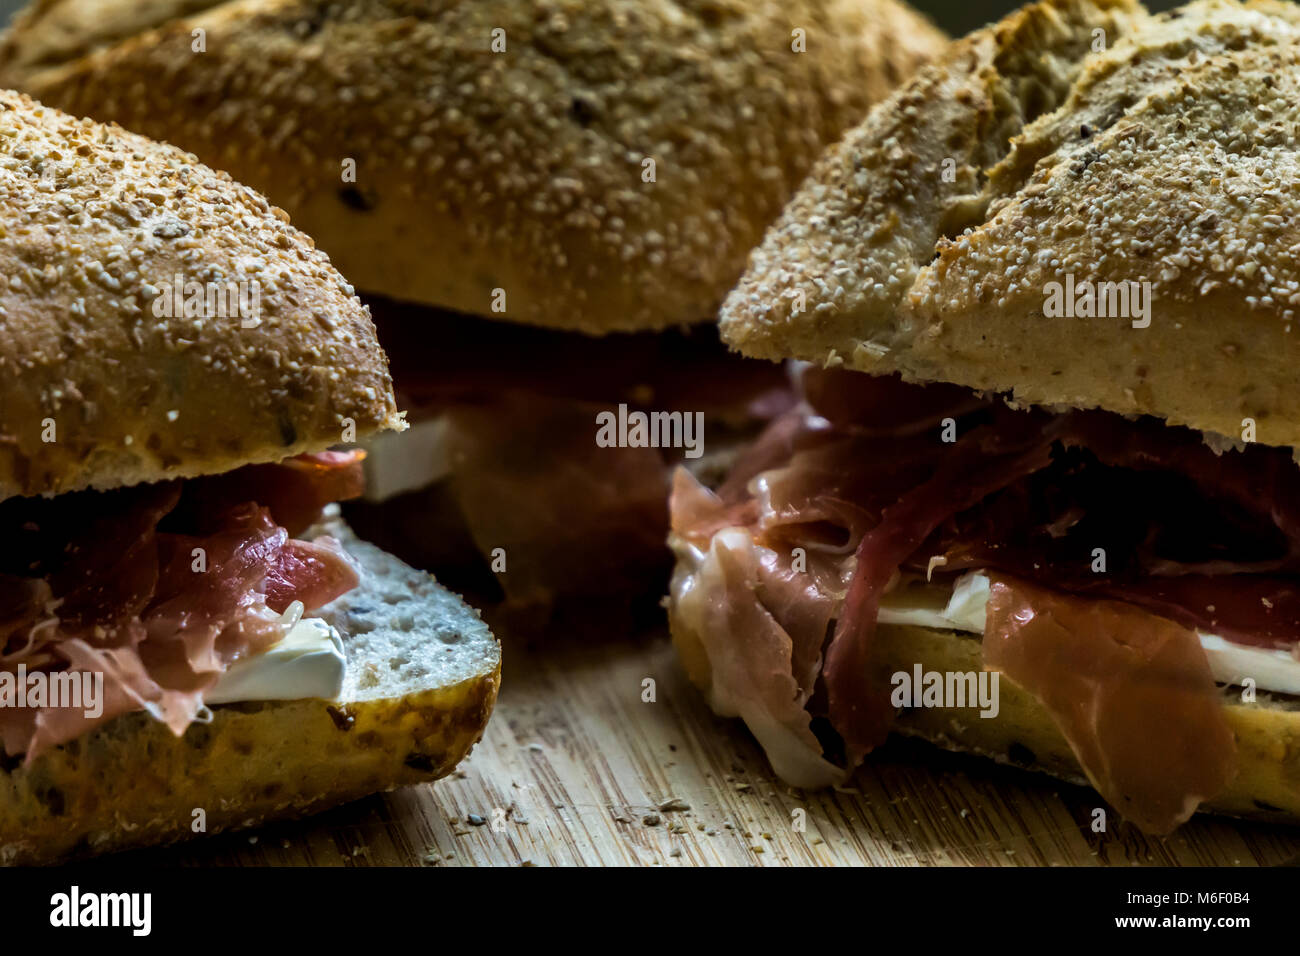 Three serrano ham sandwiches with wholegrain bread and brie cheese laying on a wooden board with small grain and bread crumbs Stock Photo